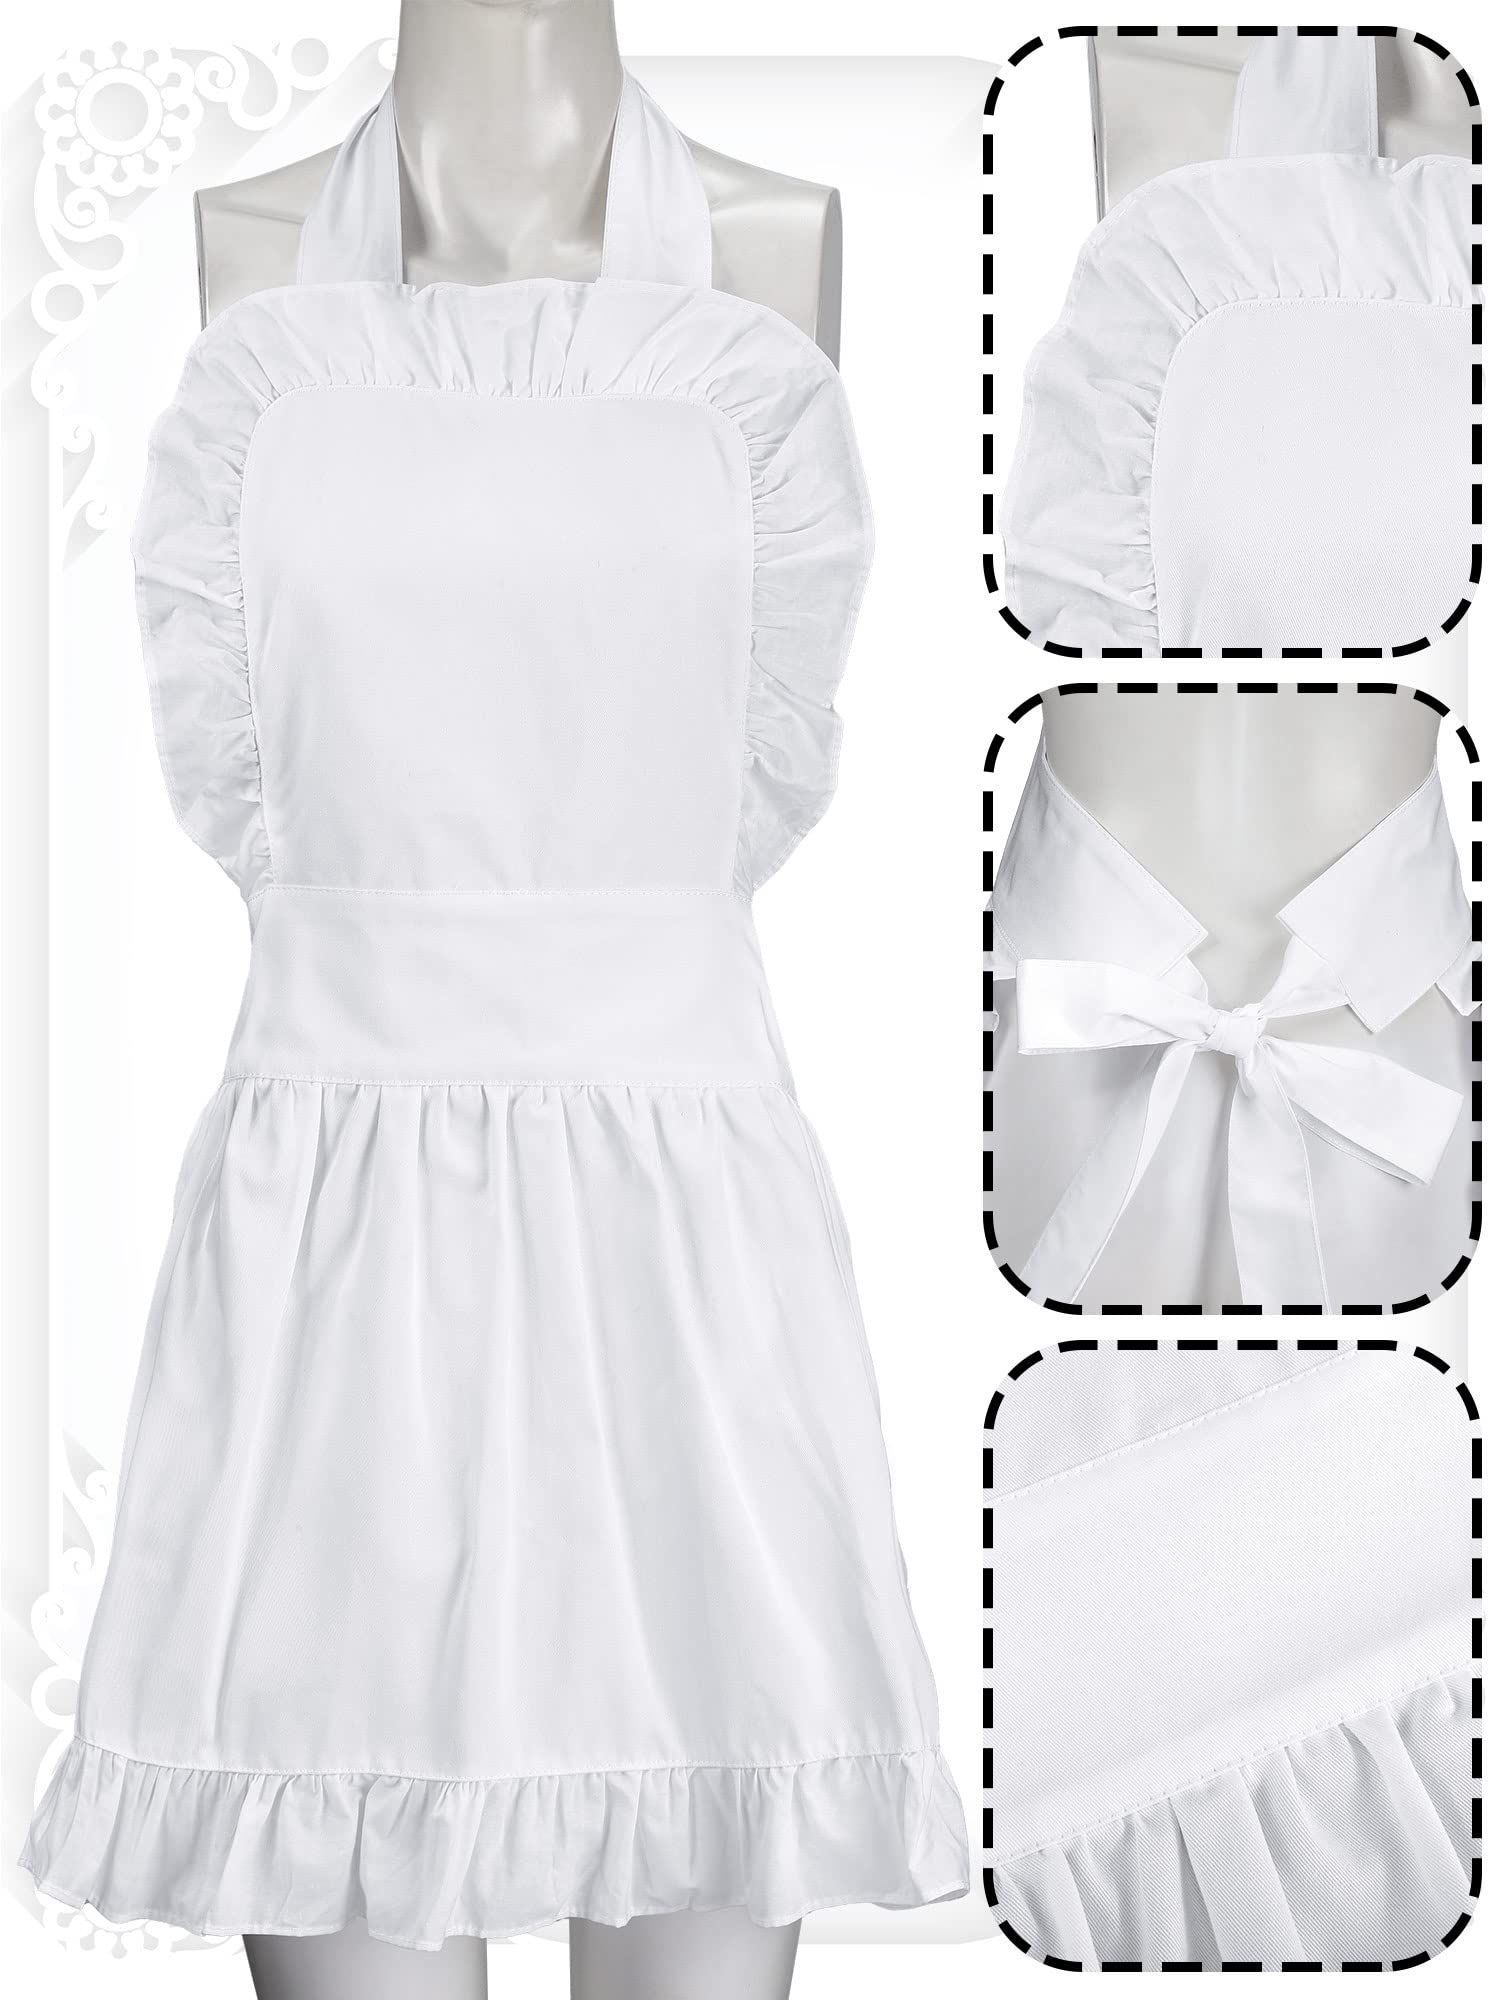 Newcotte Maid Aprons Colonial Aprons Adjustable Bib White Retro Ruffle Apron renaissance french maid apron colonial costume girls apron Kitchen Cooking Baking Cleaning Maid Costume(White)